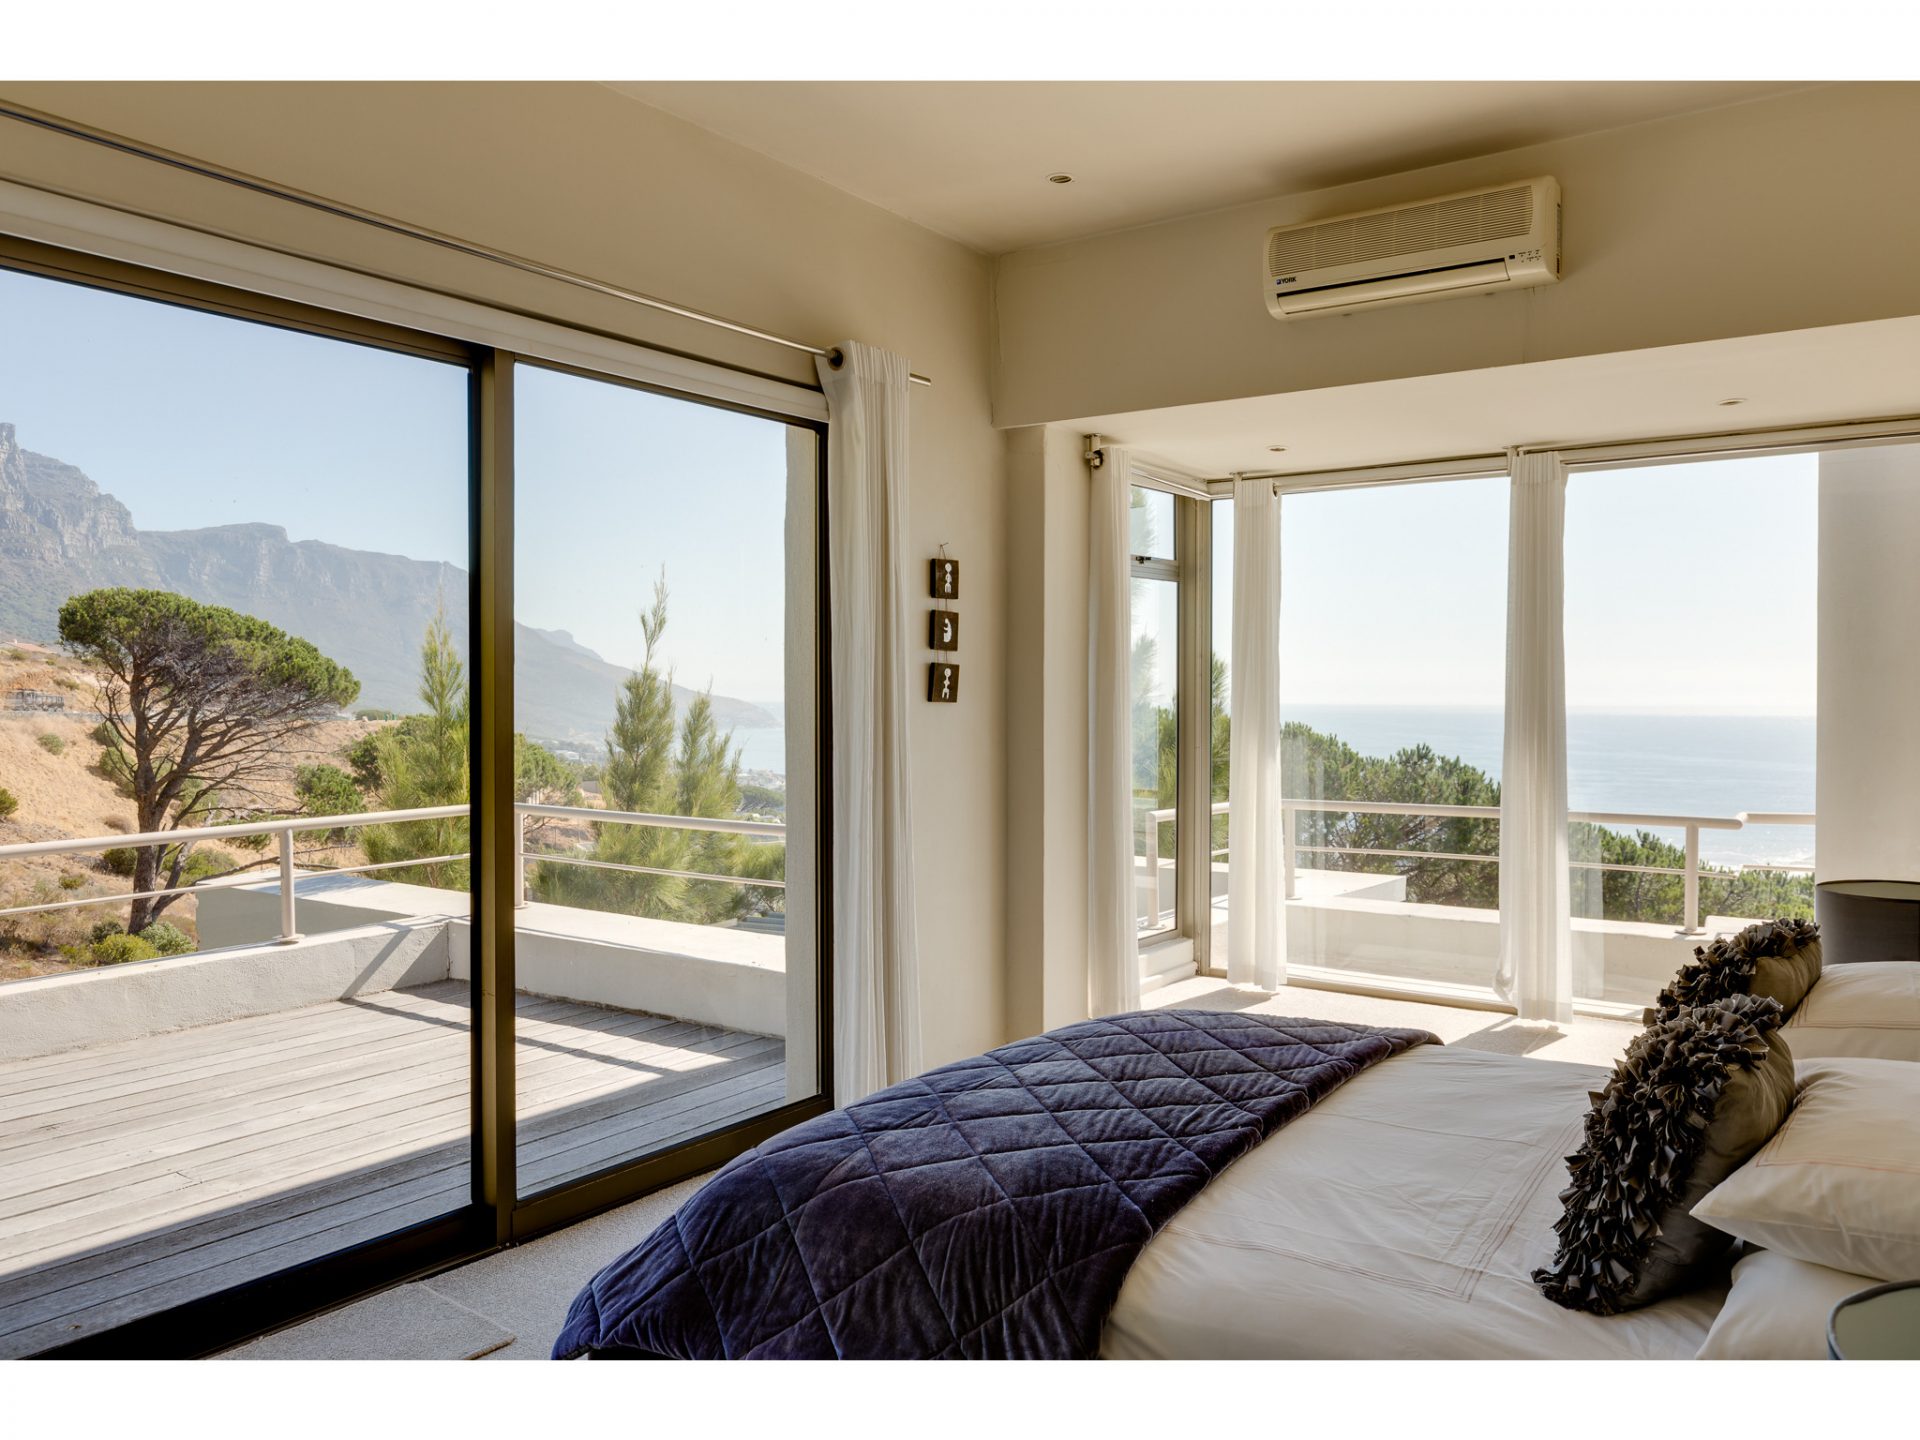 Photo 9 of Geneva Sunsets accommodation in Camps Bay, Cape Town with 6 bedrooms and 7 bathrooms